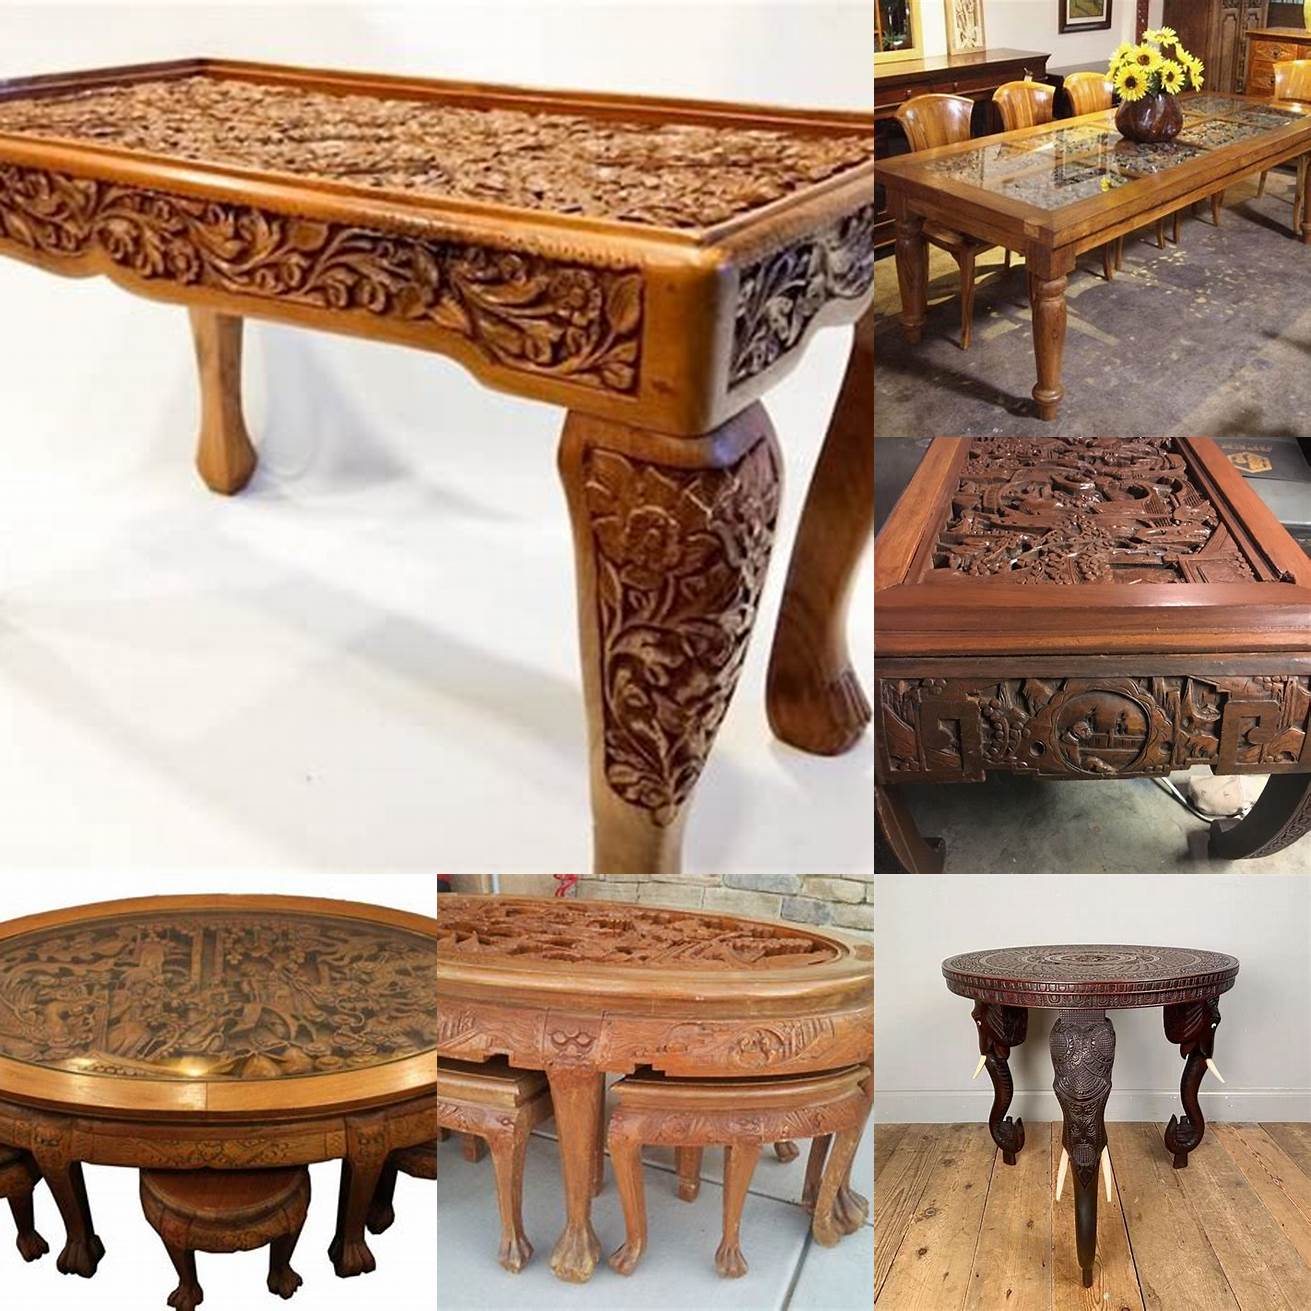 Teak Table with Carved Legs